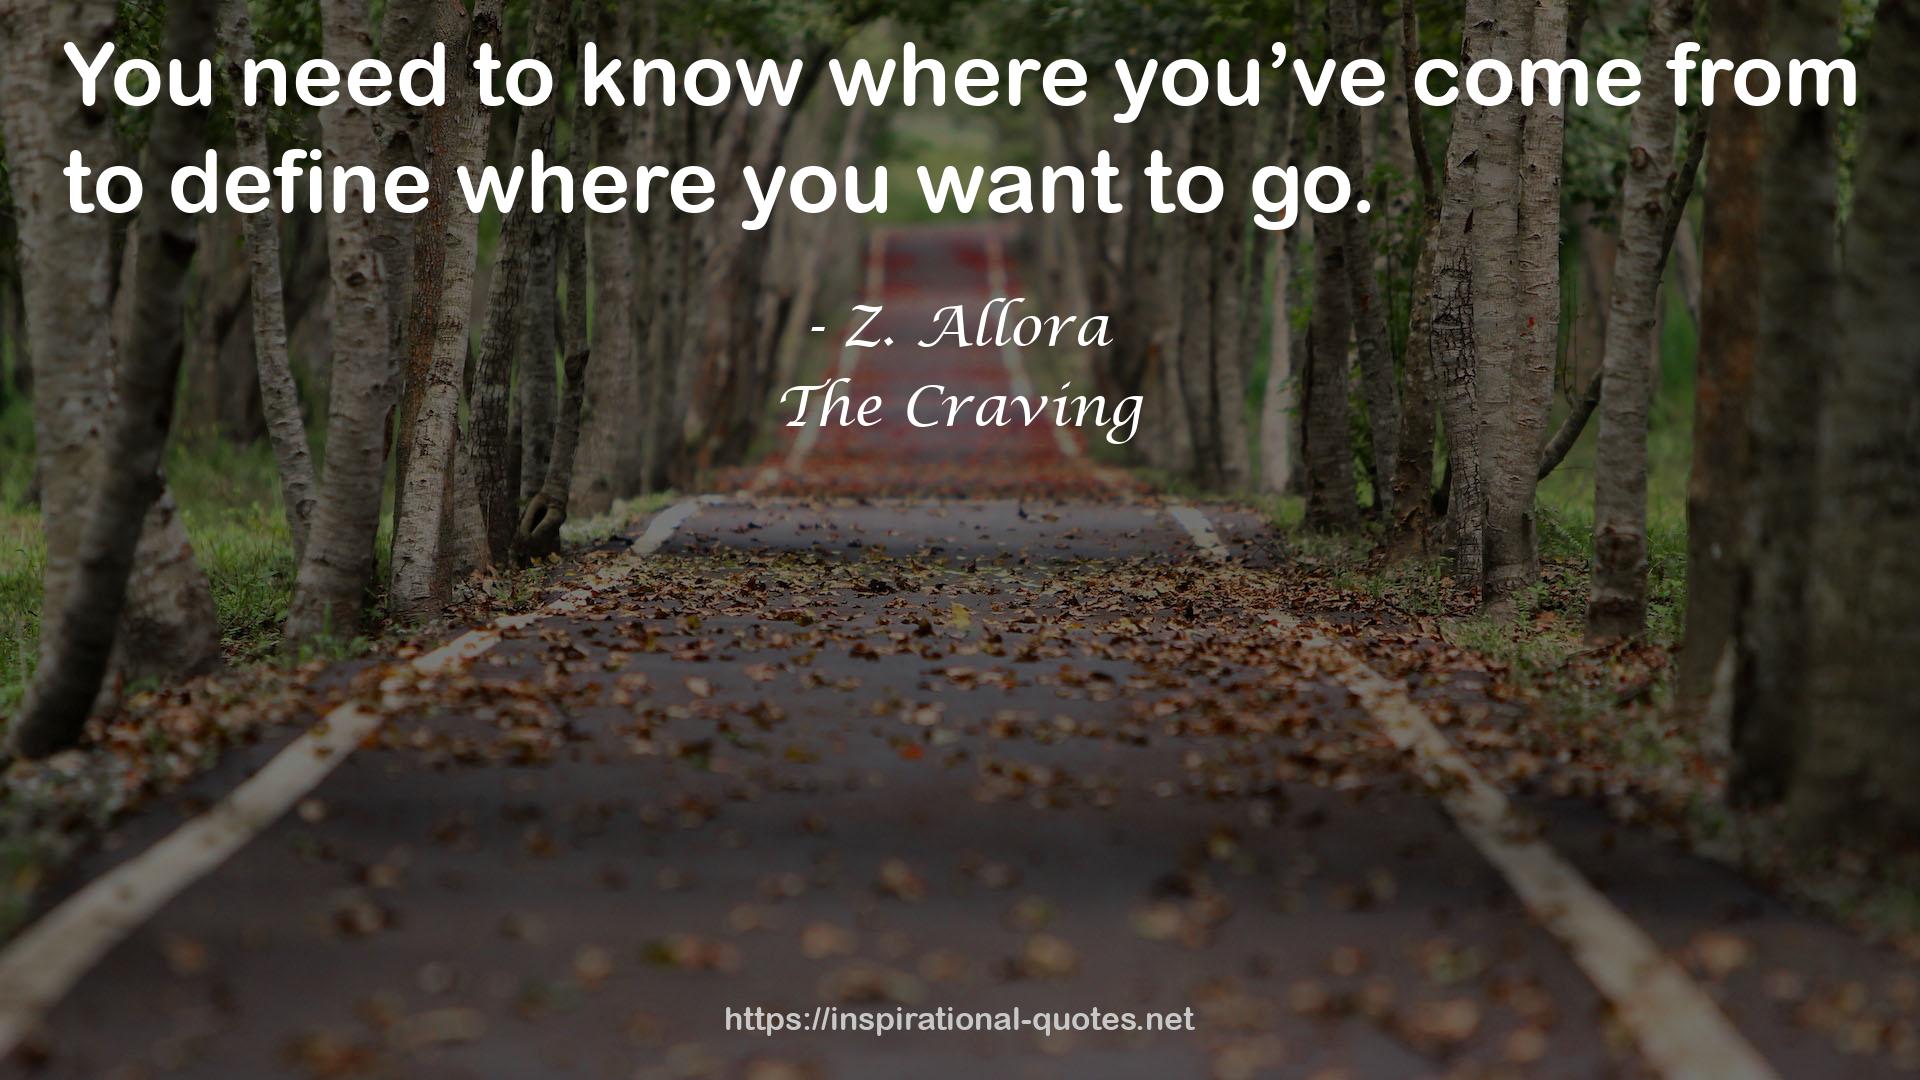 The Craving QUOTES